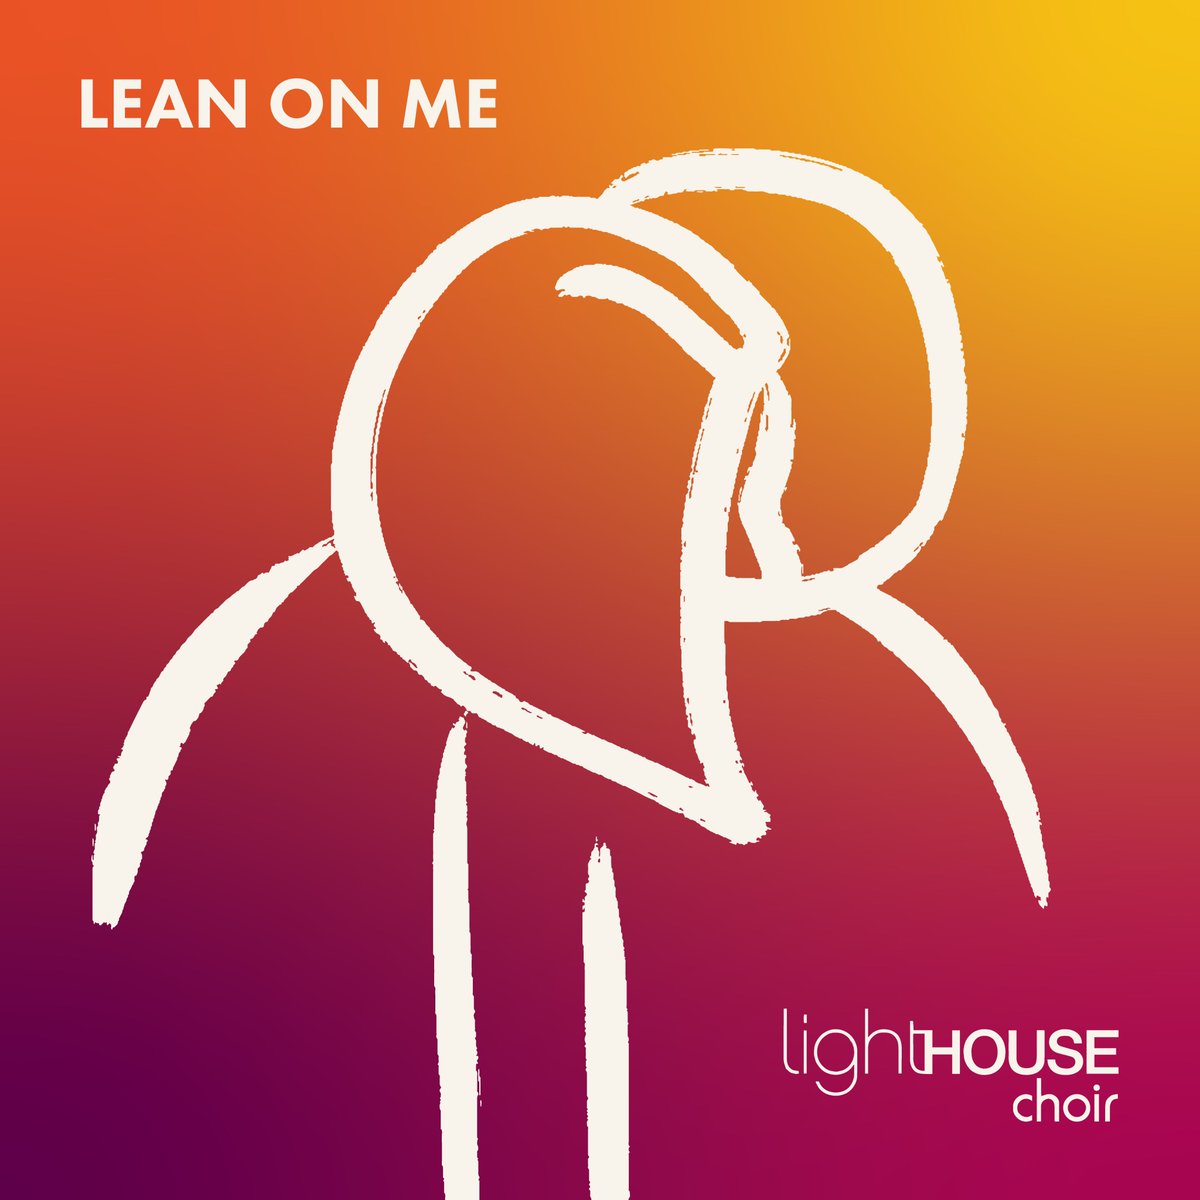 lighthousechoir new single 'Lean on Me' is out now on all streaming platforms. Don't listen alone, share it with friends and family. Link below to listen 🎧👇 wingsmusic.lnk.to/LeanOnMe #single #leanonme #LighthouseChoir